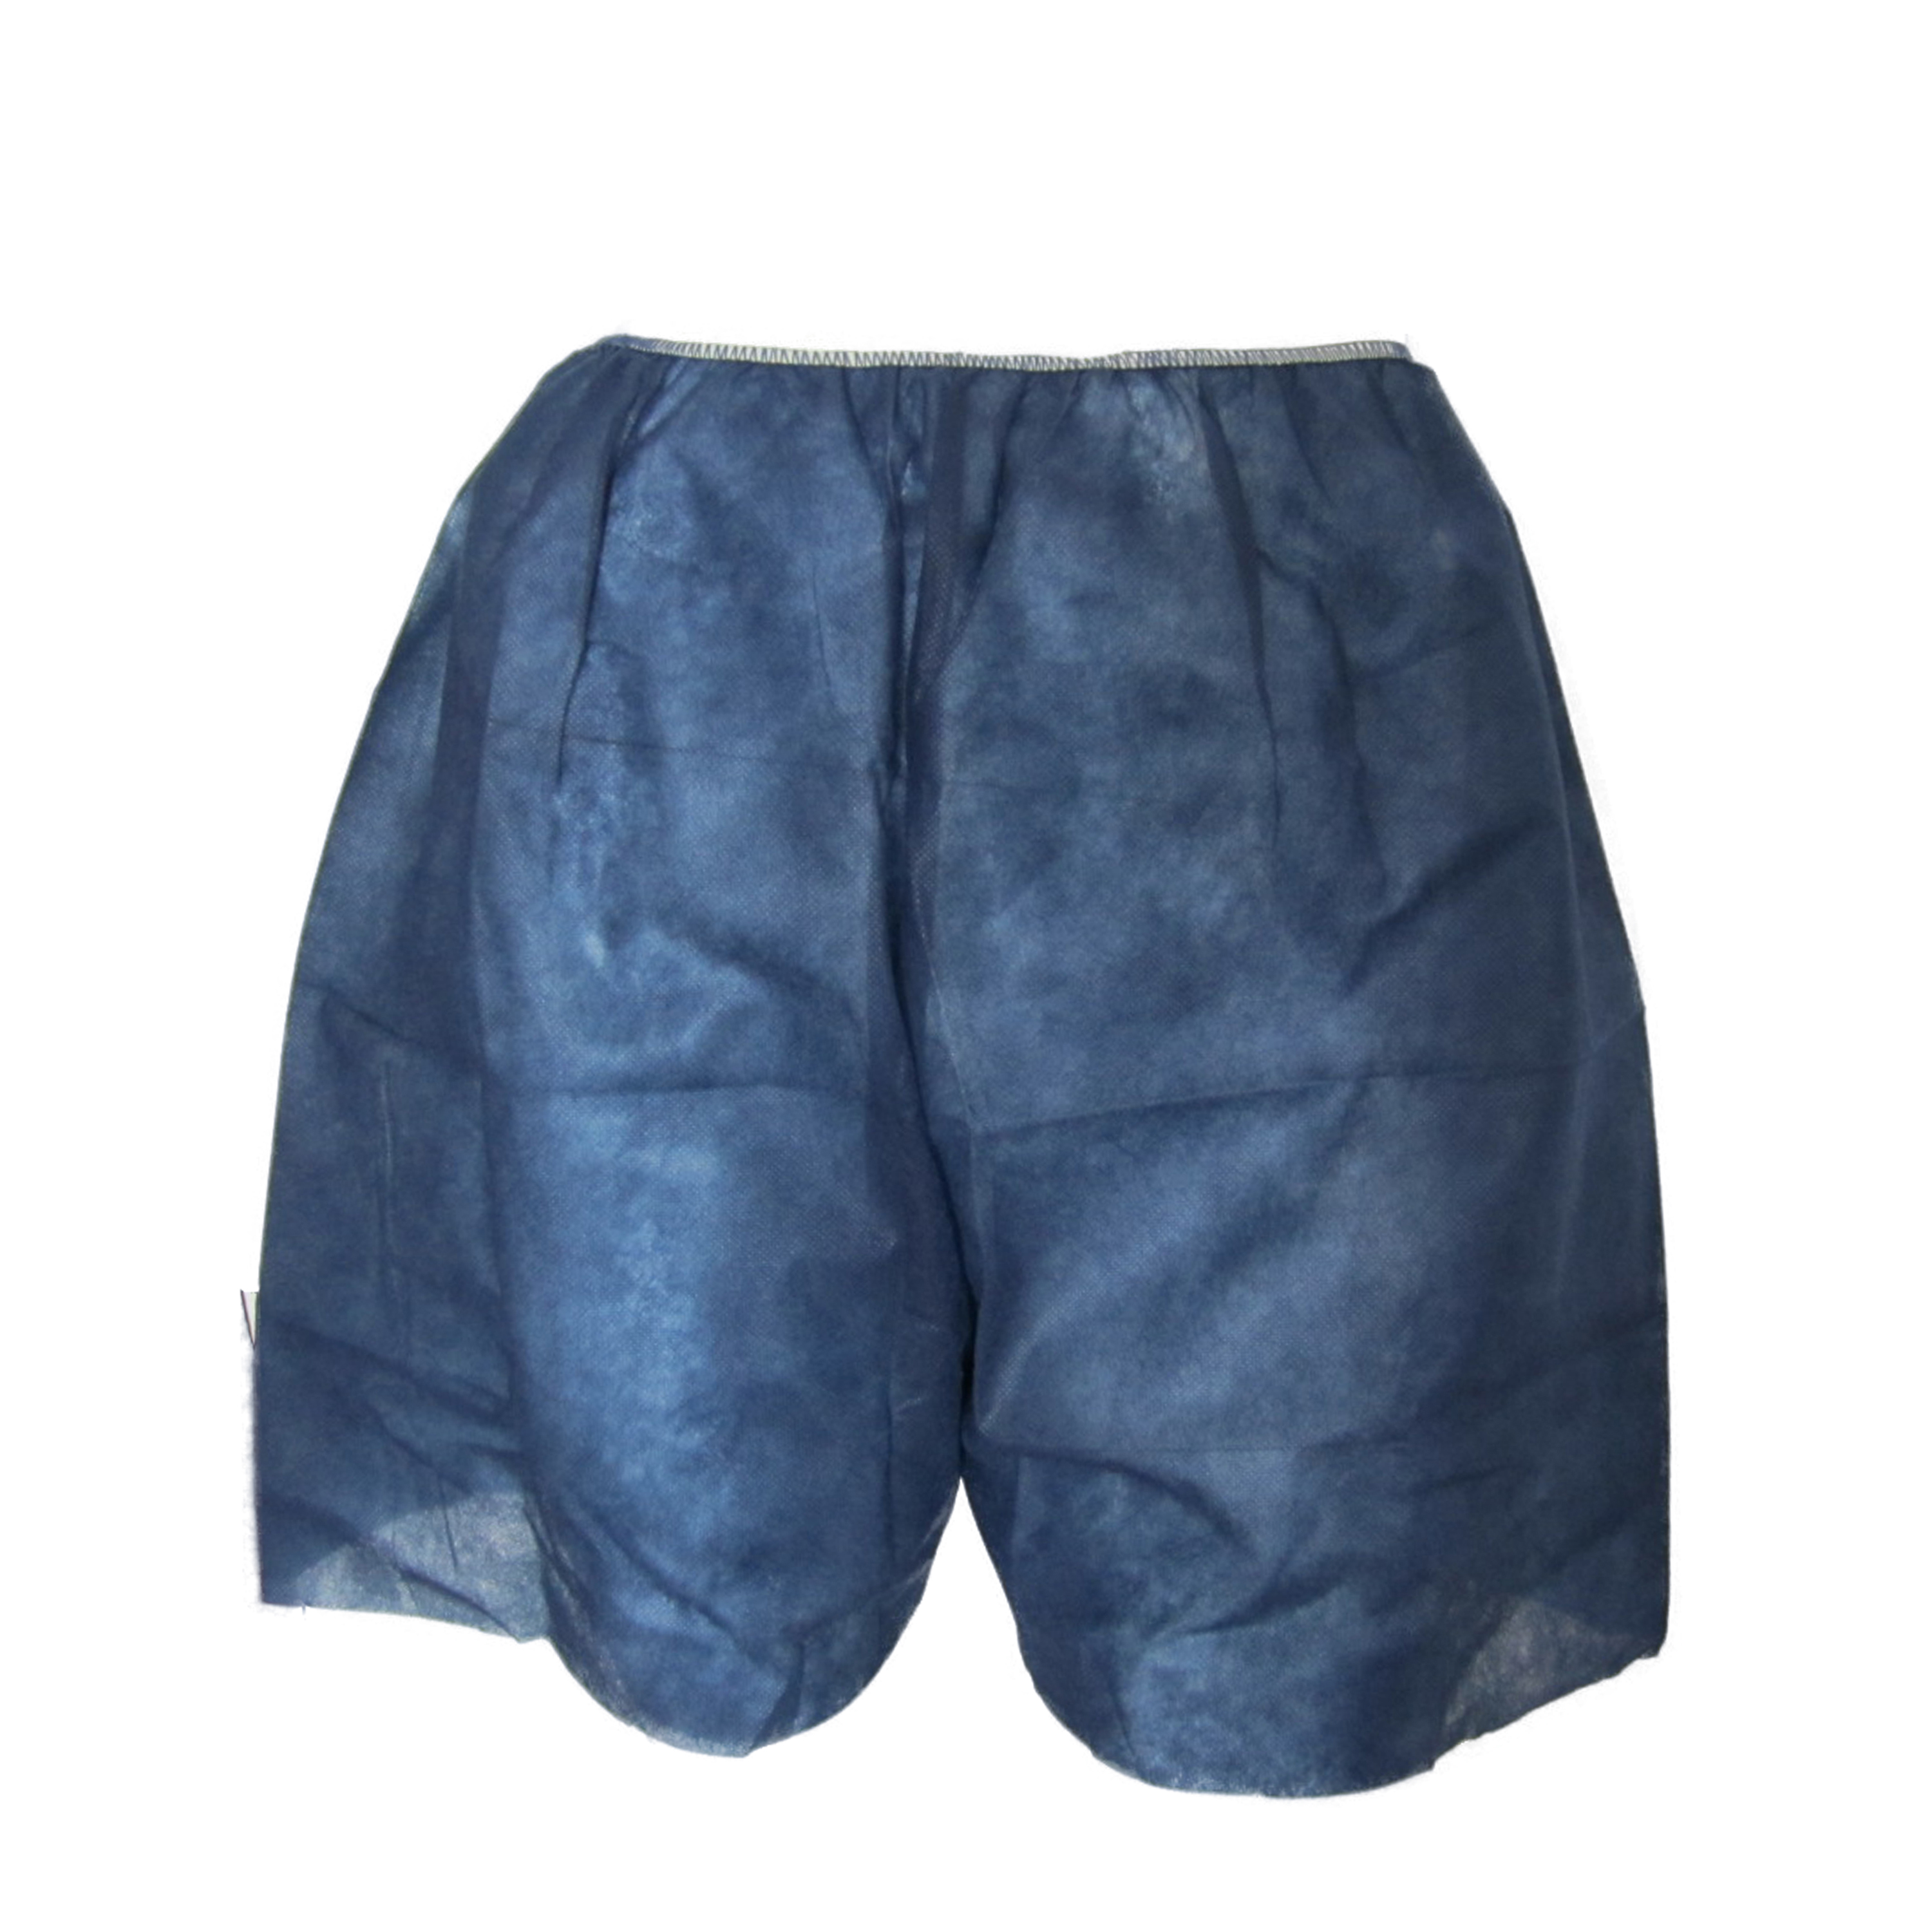 SMS 50g Dark Blue Non Woven Fabric Medical Colonoscopy Patient Exam Shorts Disposable Underwear Pants For Adult